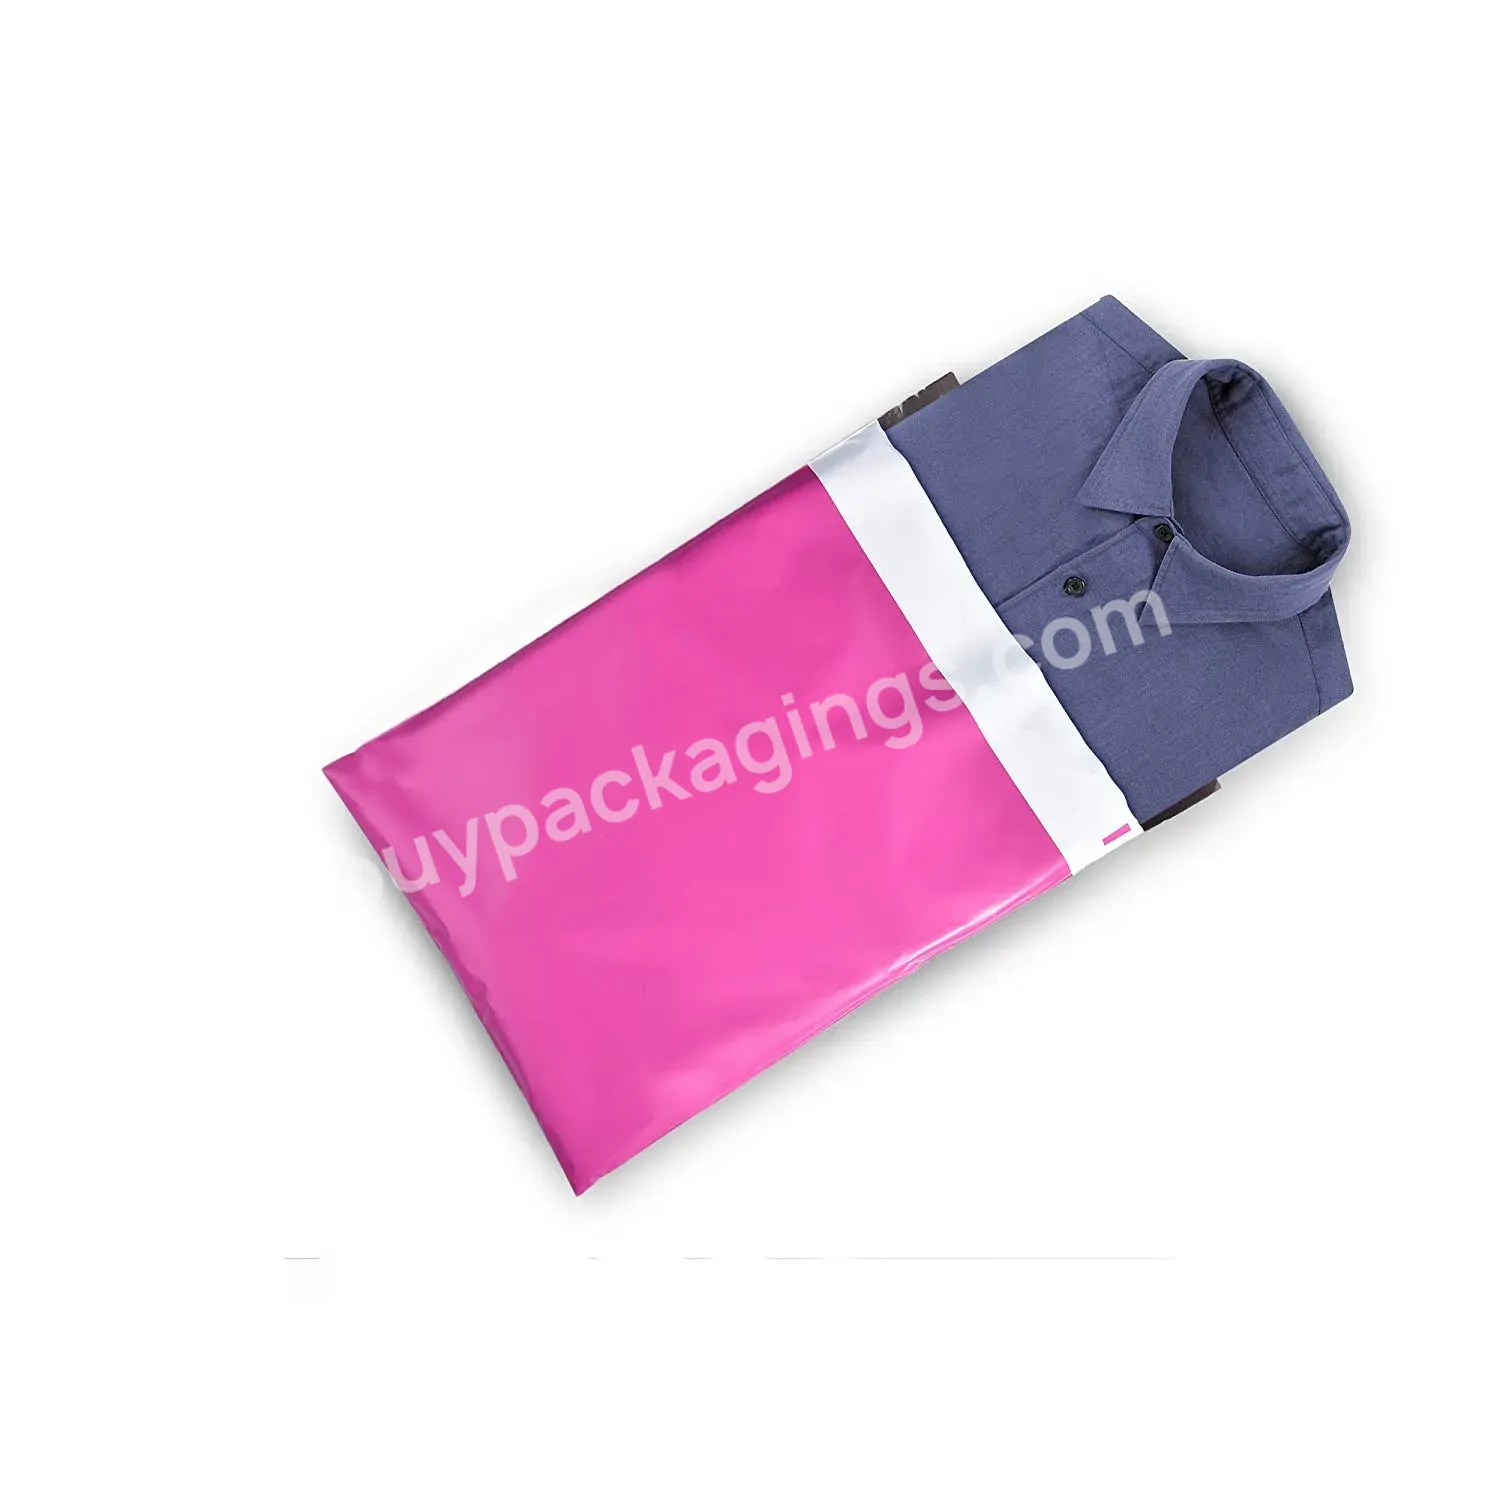 Thank You Poly Mailer 6x9 Custom Shipping Mailers Printing Custom Design Cute Polymailer Customized Mailing Bag Parcel